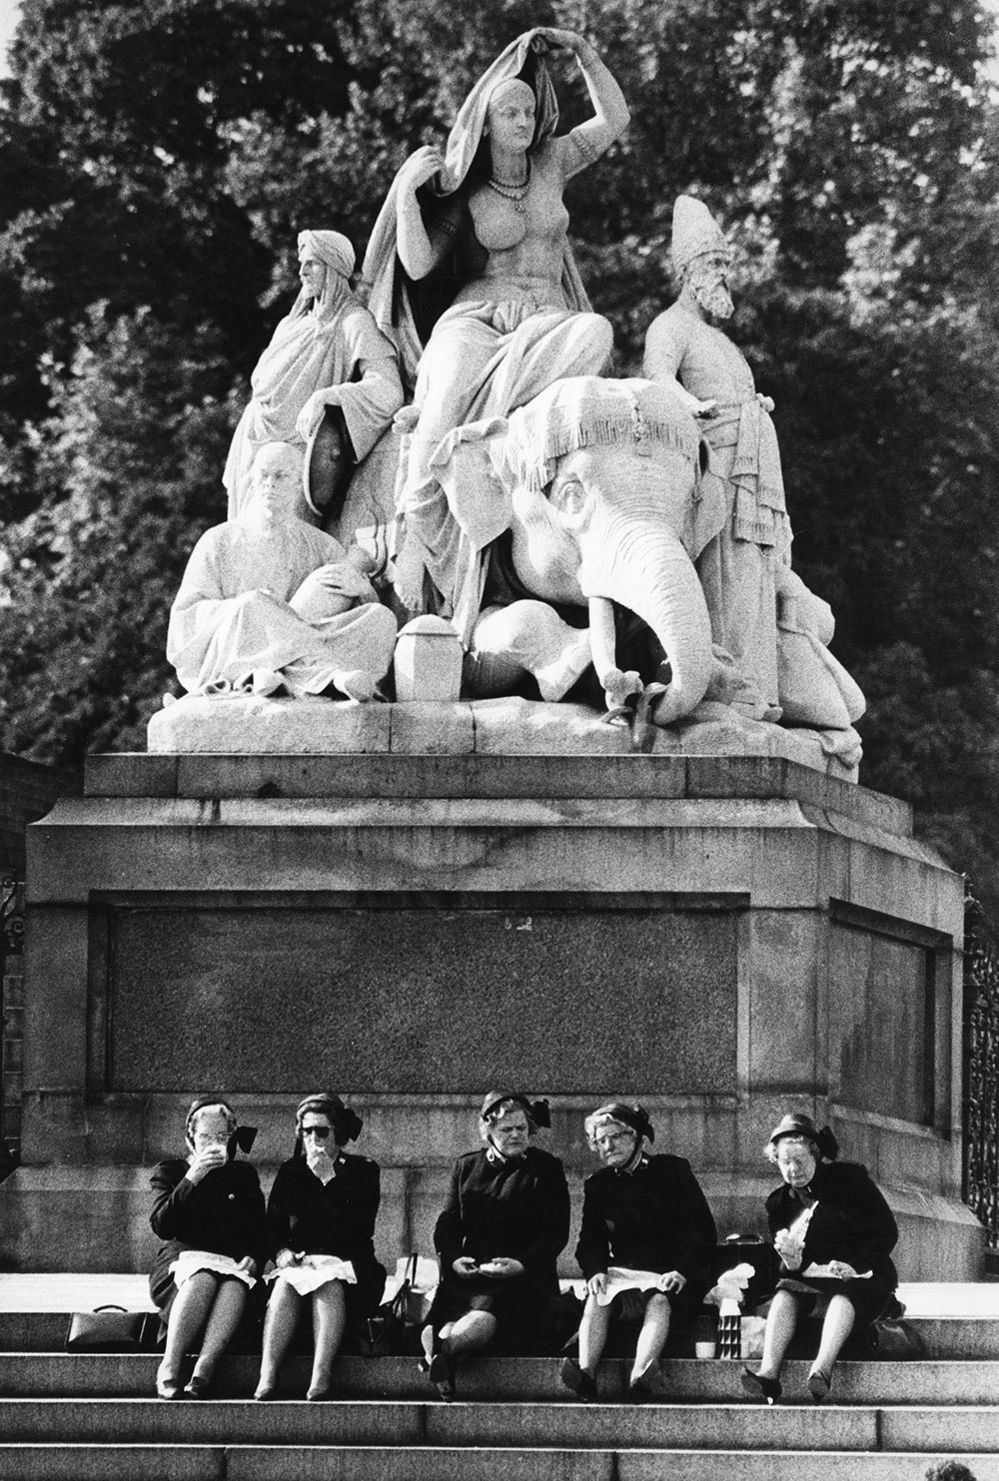 Salvation Army officers on the steps of the figure group Asia, Albert Memorial, Kensington Gardens, London